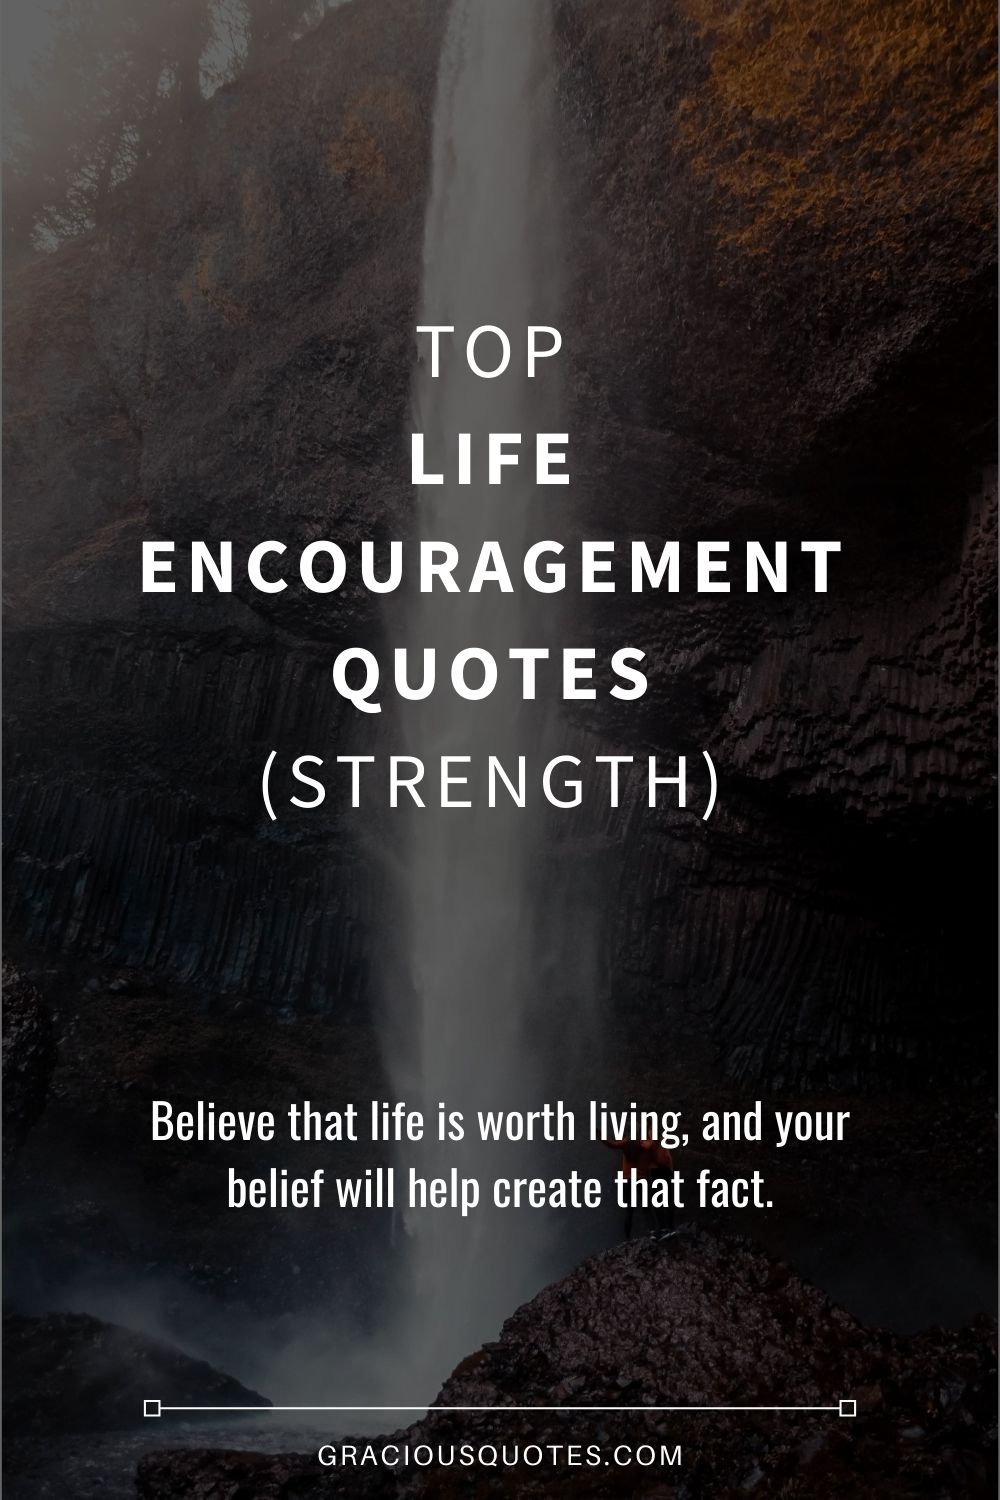 Top Life Encouragement Quotes (STRENGTH) - Gracious Quotes (EDITED)